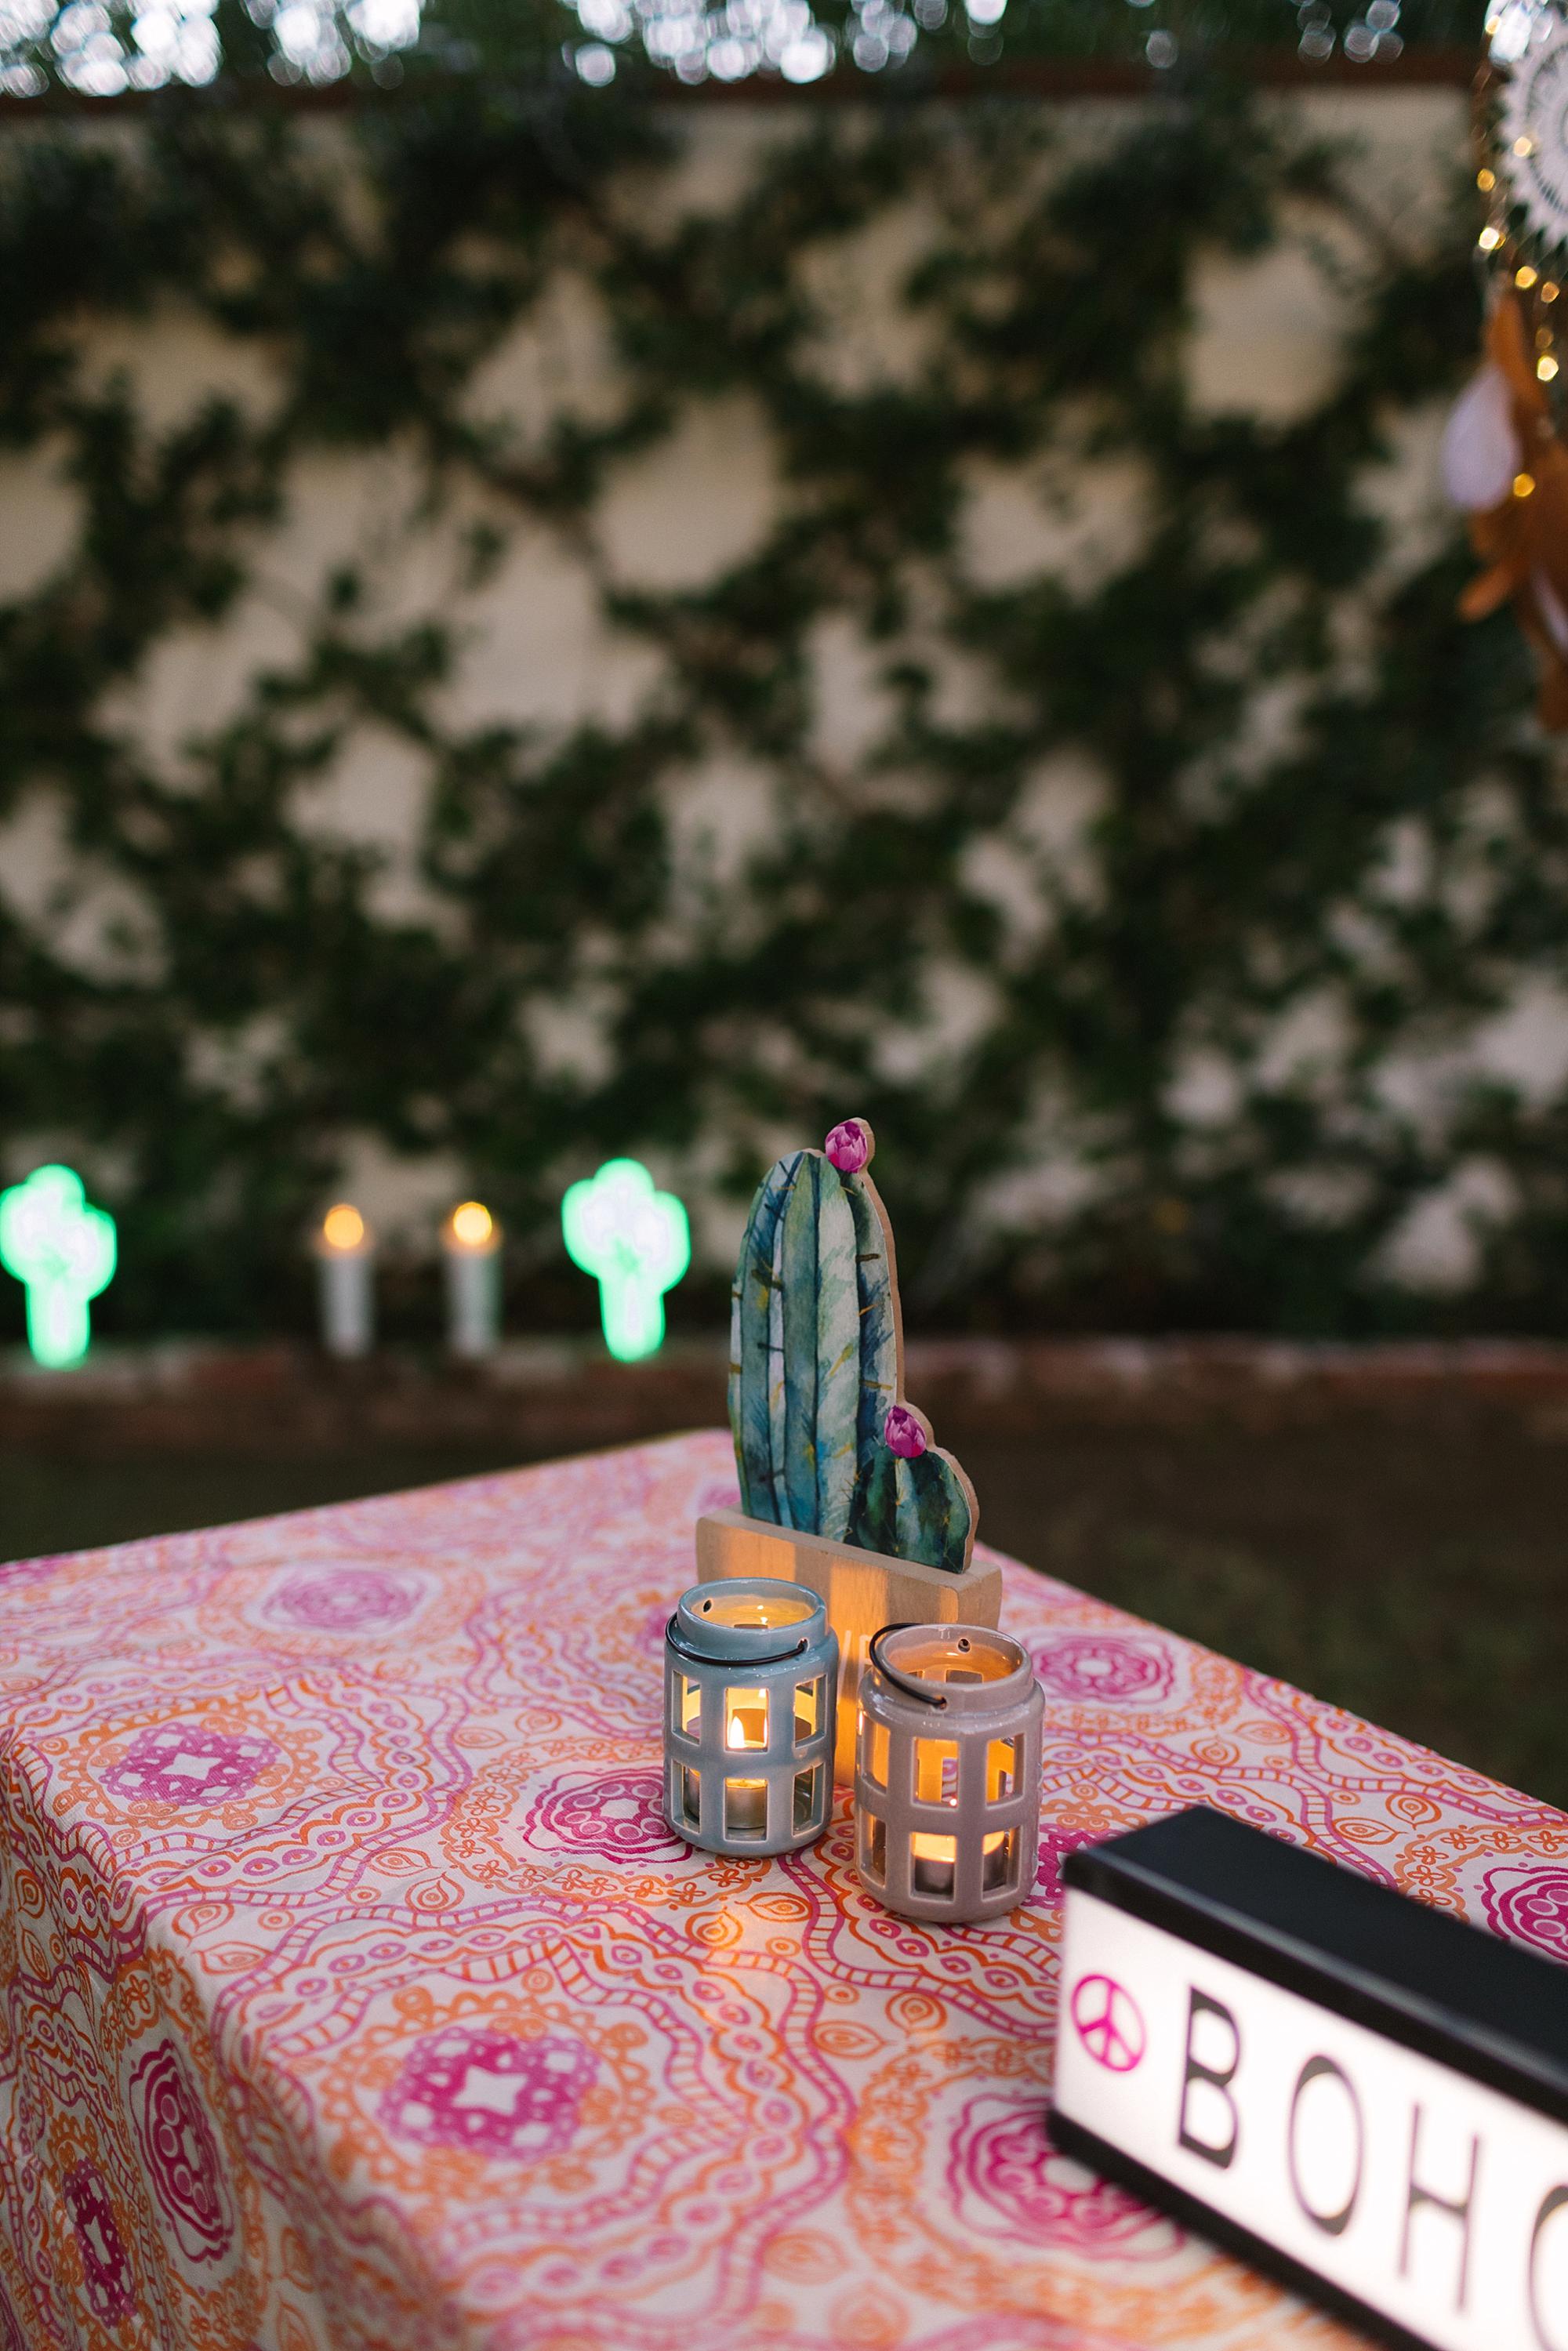 Night time boho theme party with LED light up dream catchers from the 99 only store - check out this party all from the 99 cent store to stay under budget for your party! cactus tealights